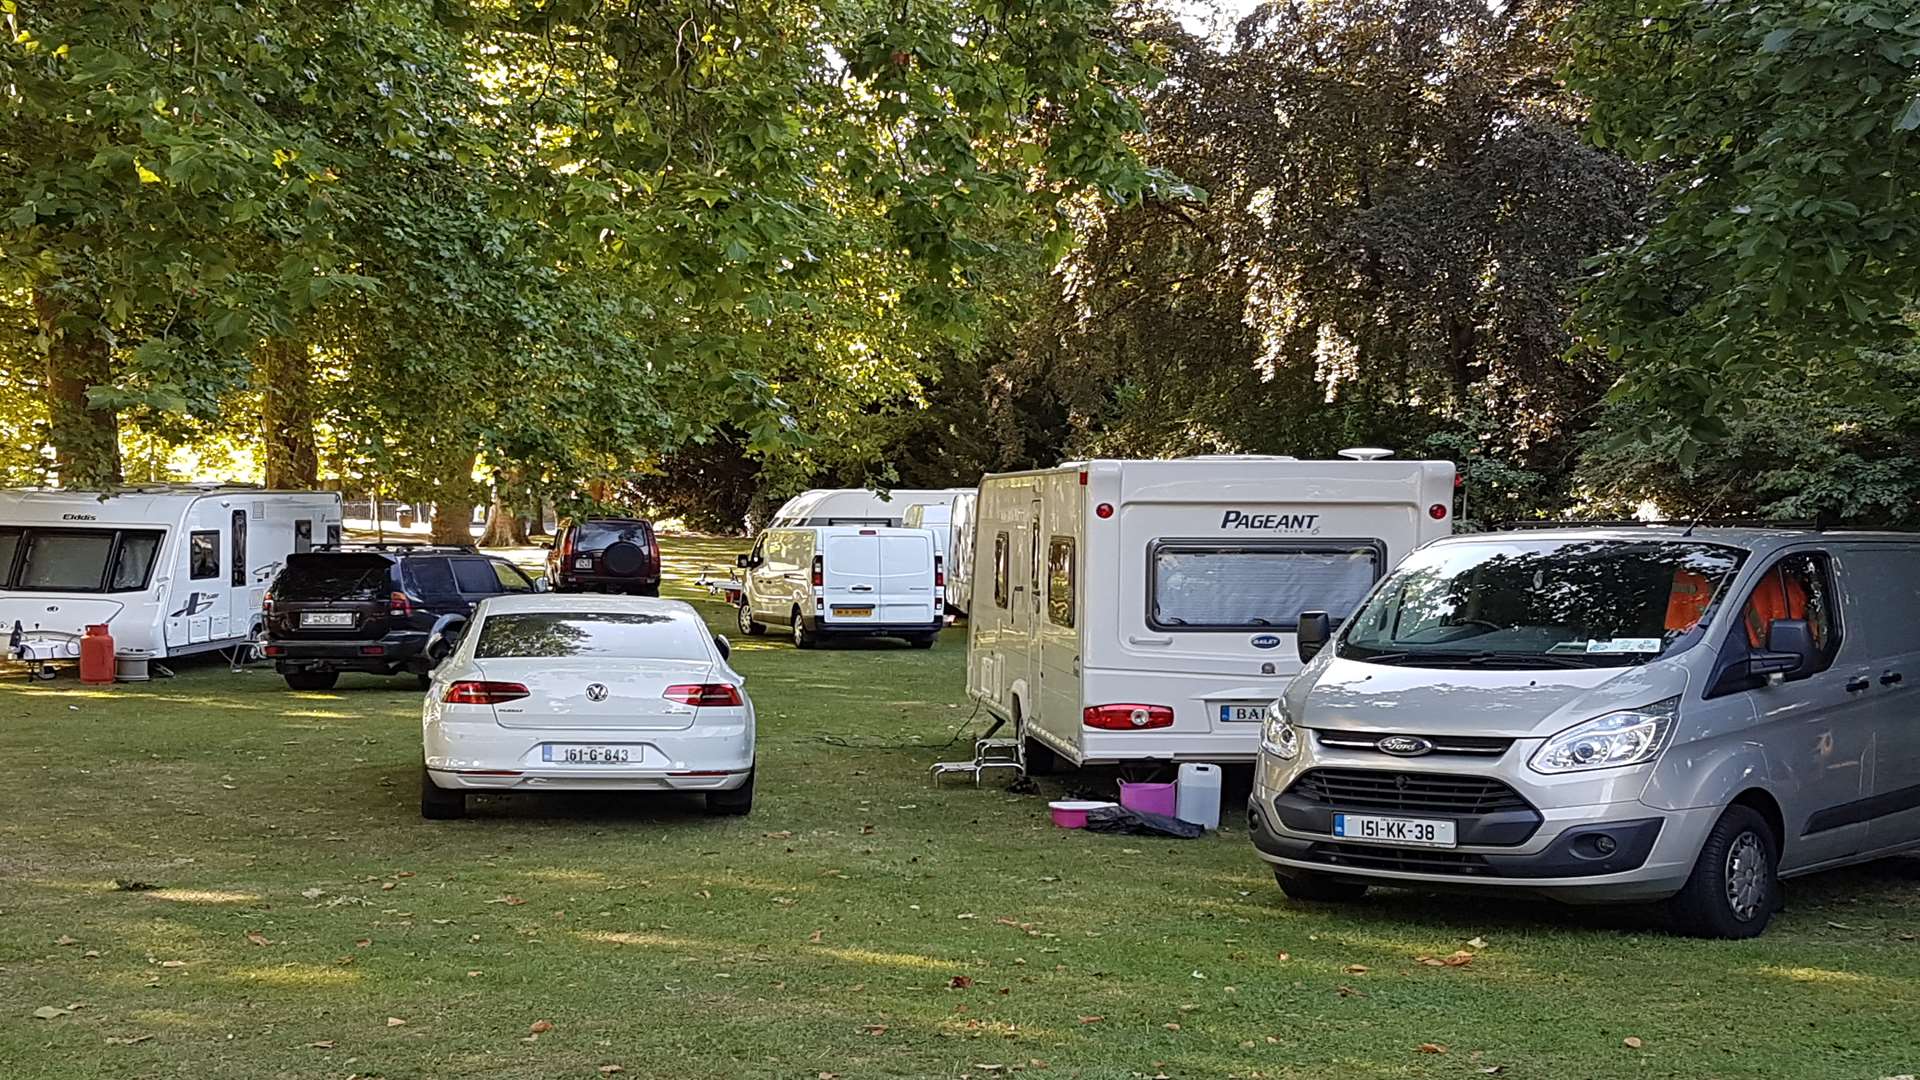 Irish travellers have set up camp in The Vines, Rochester. Pic: Cllr Stuart Tranter